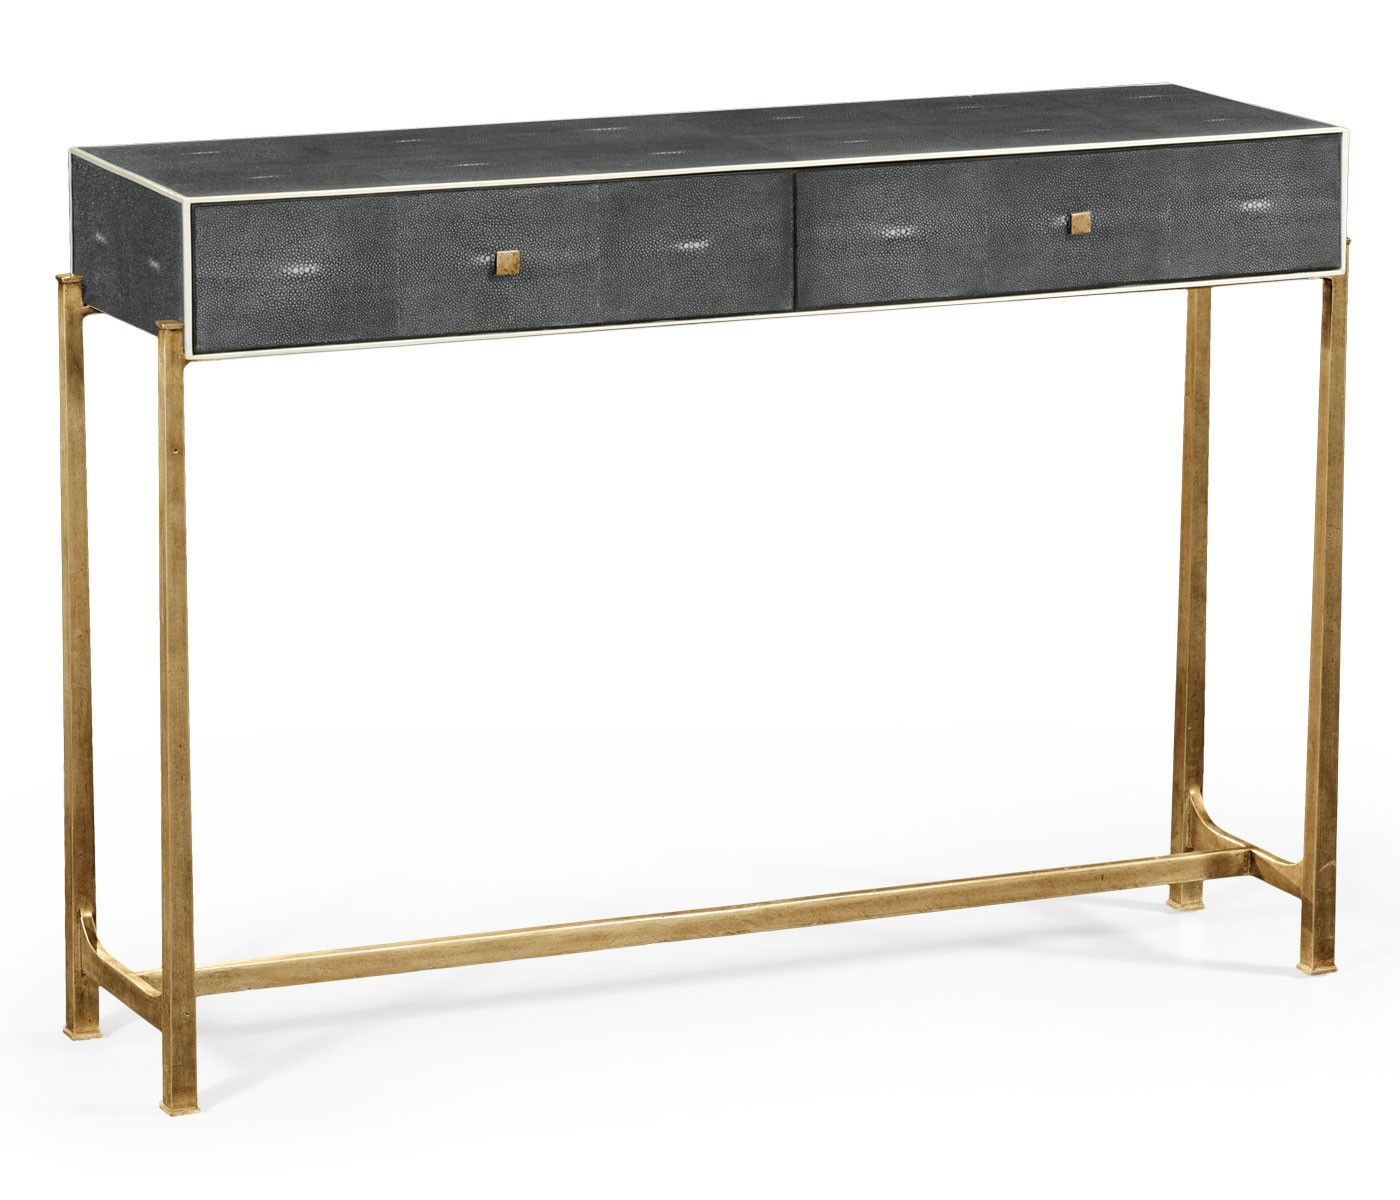 Faux Anthracite Shagreen Console | Pavilion Broadway Intended For Faux Shagreen Console Tables (View 10 of 30)